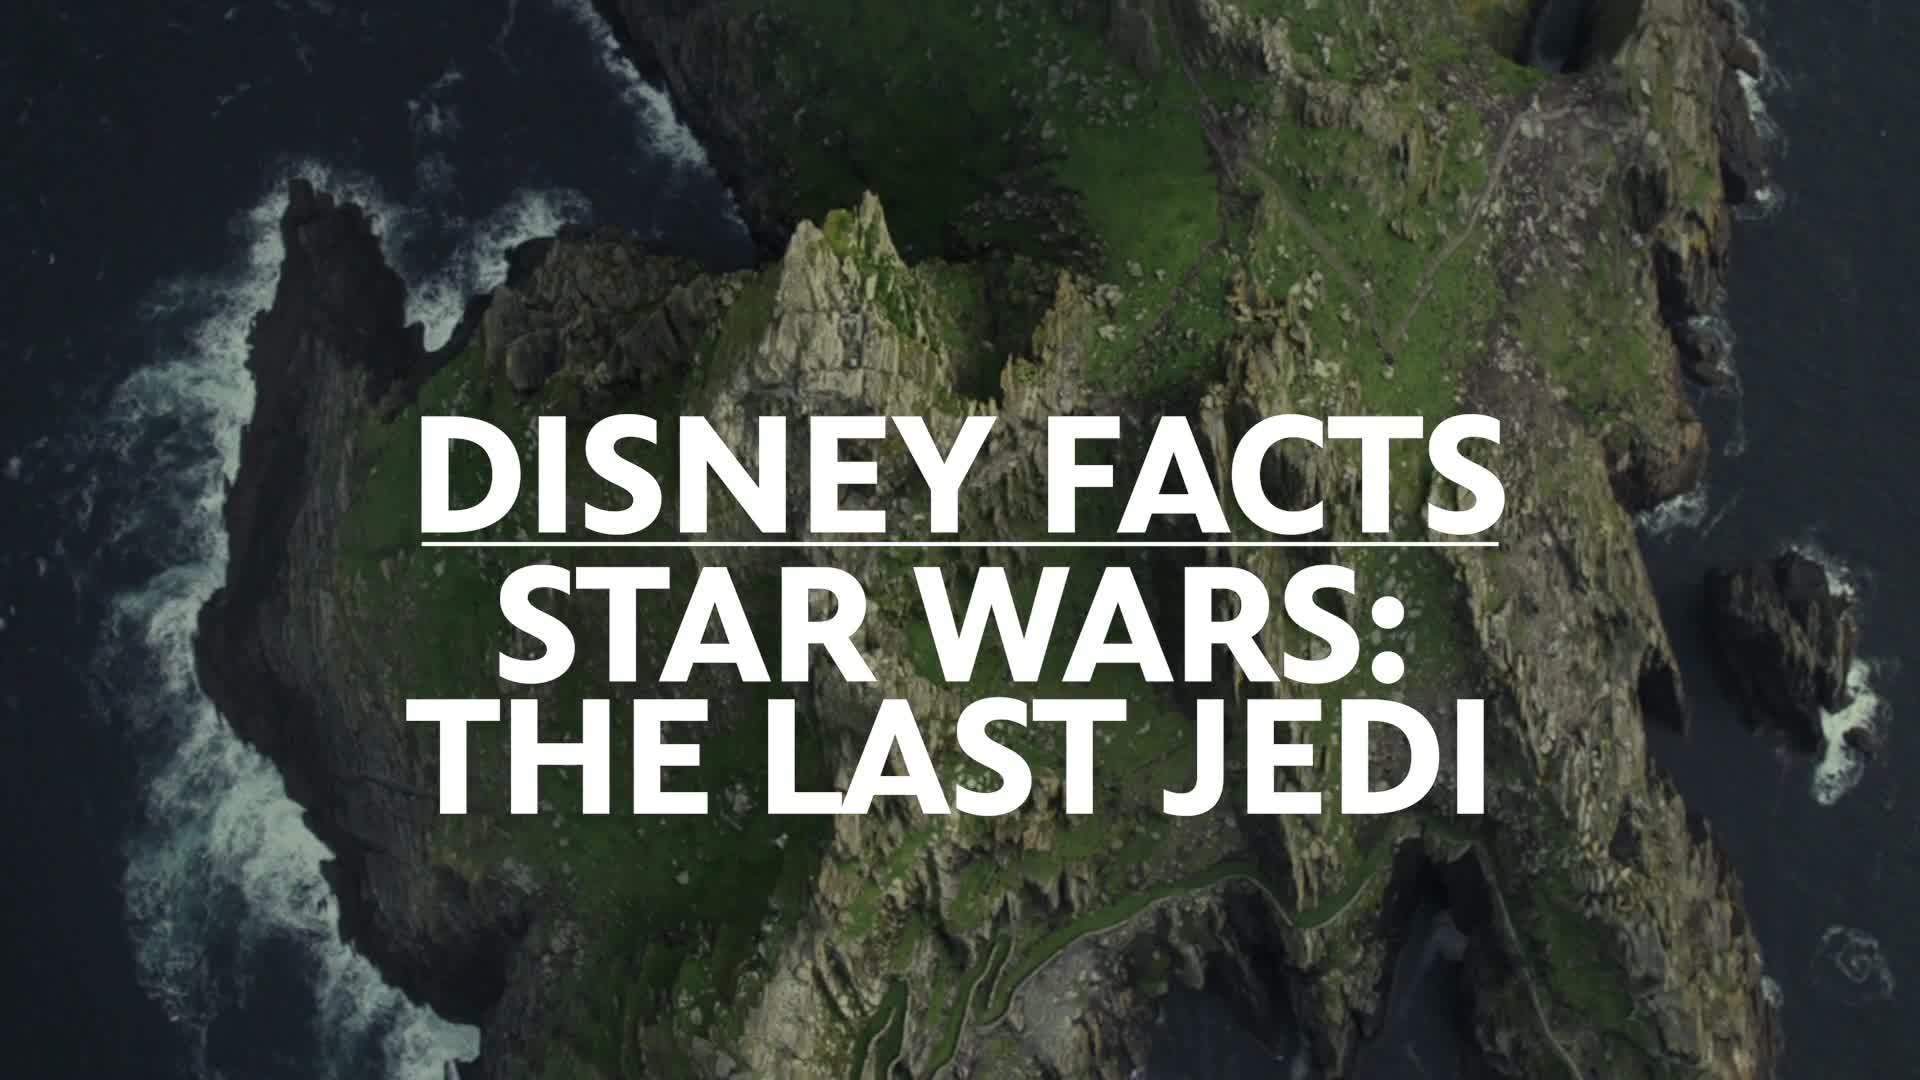 Fun Facts From Star Wars: The Last Jedi | Disney Facts by Disney